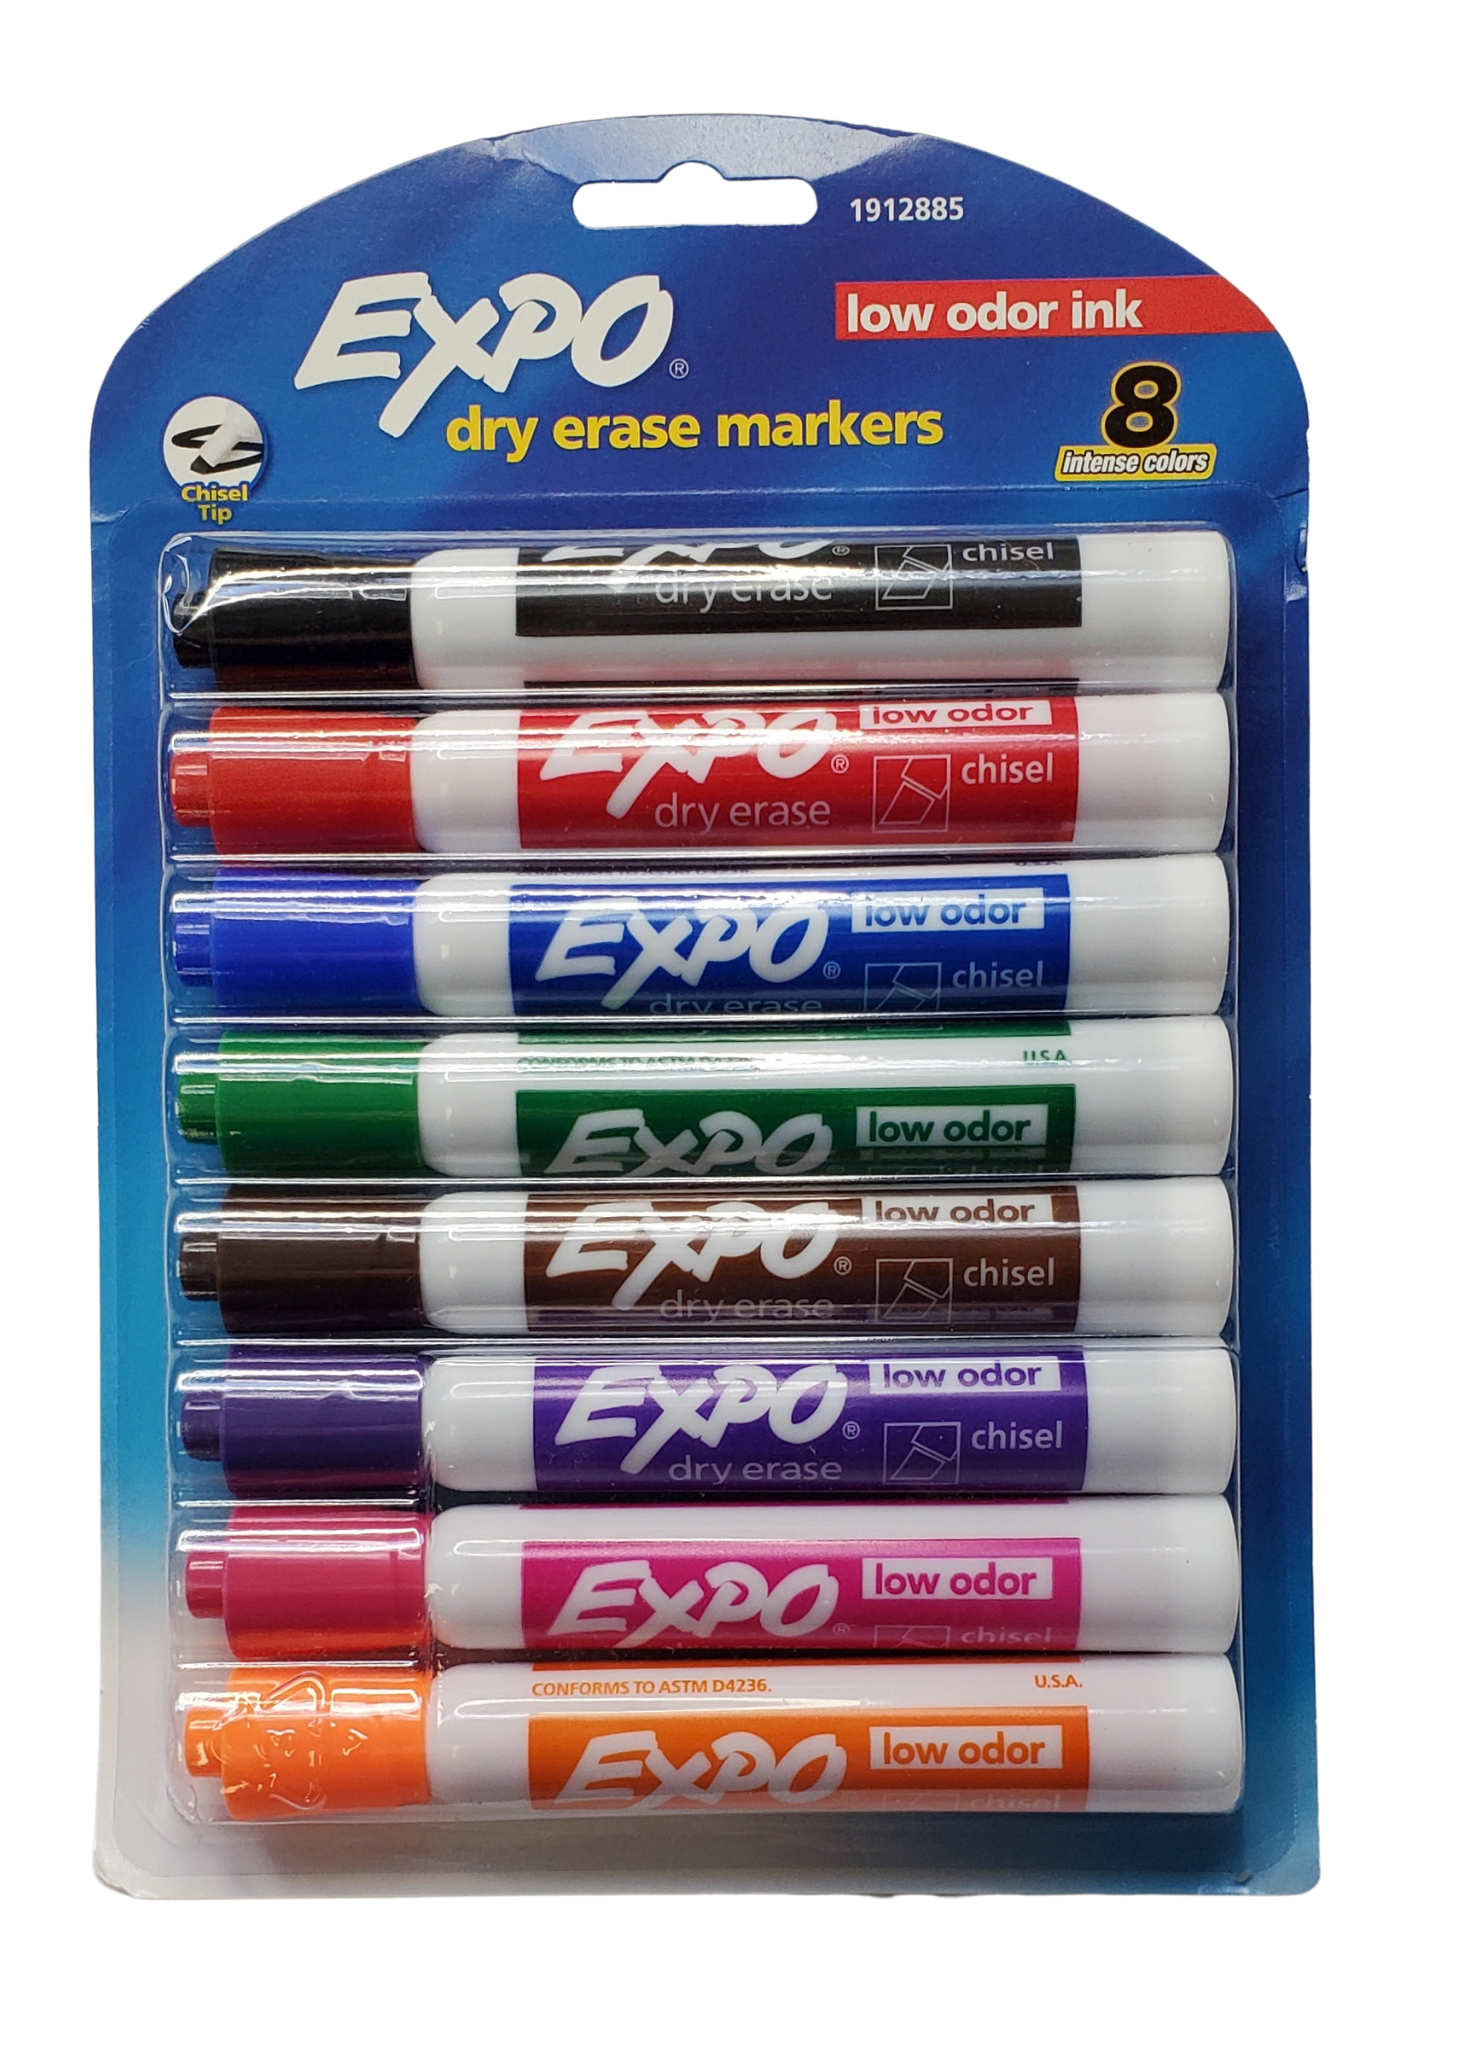 Expo Dry Erase Low Odor Chisel Tip Markers, 8 Intense Colors (1912885)